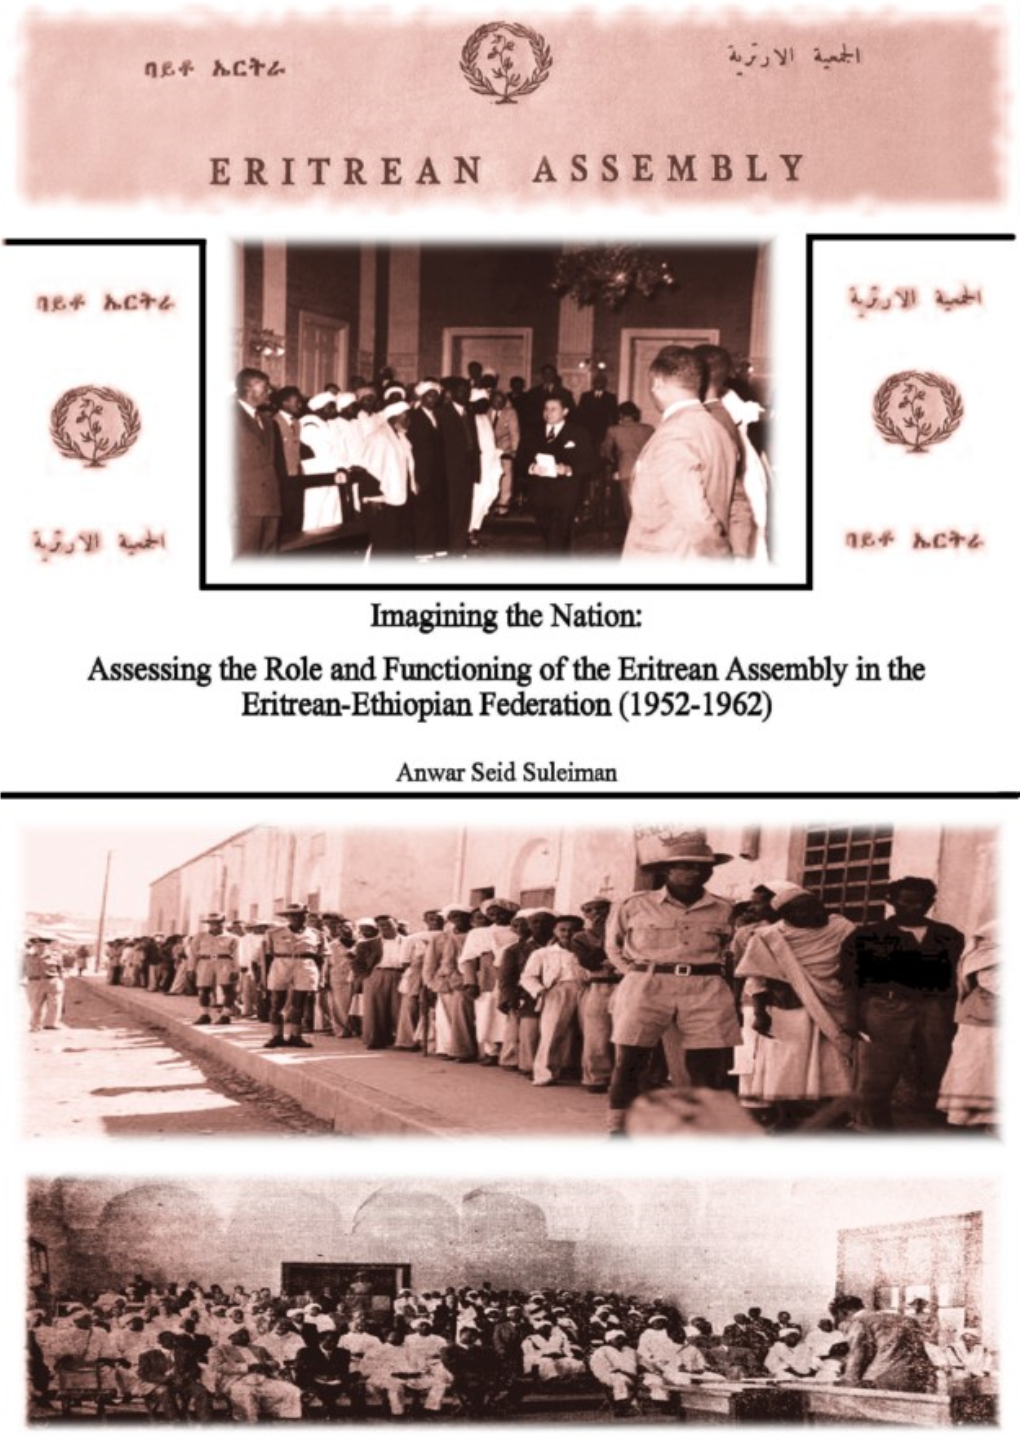 Imagining the Nation: Assessing the Role and Functioning of the Eritrean Assembly in the Eritrean-Ethiopian Federation (1952-1962)